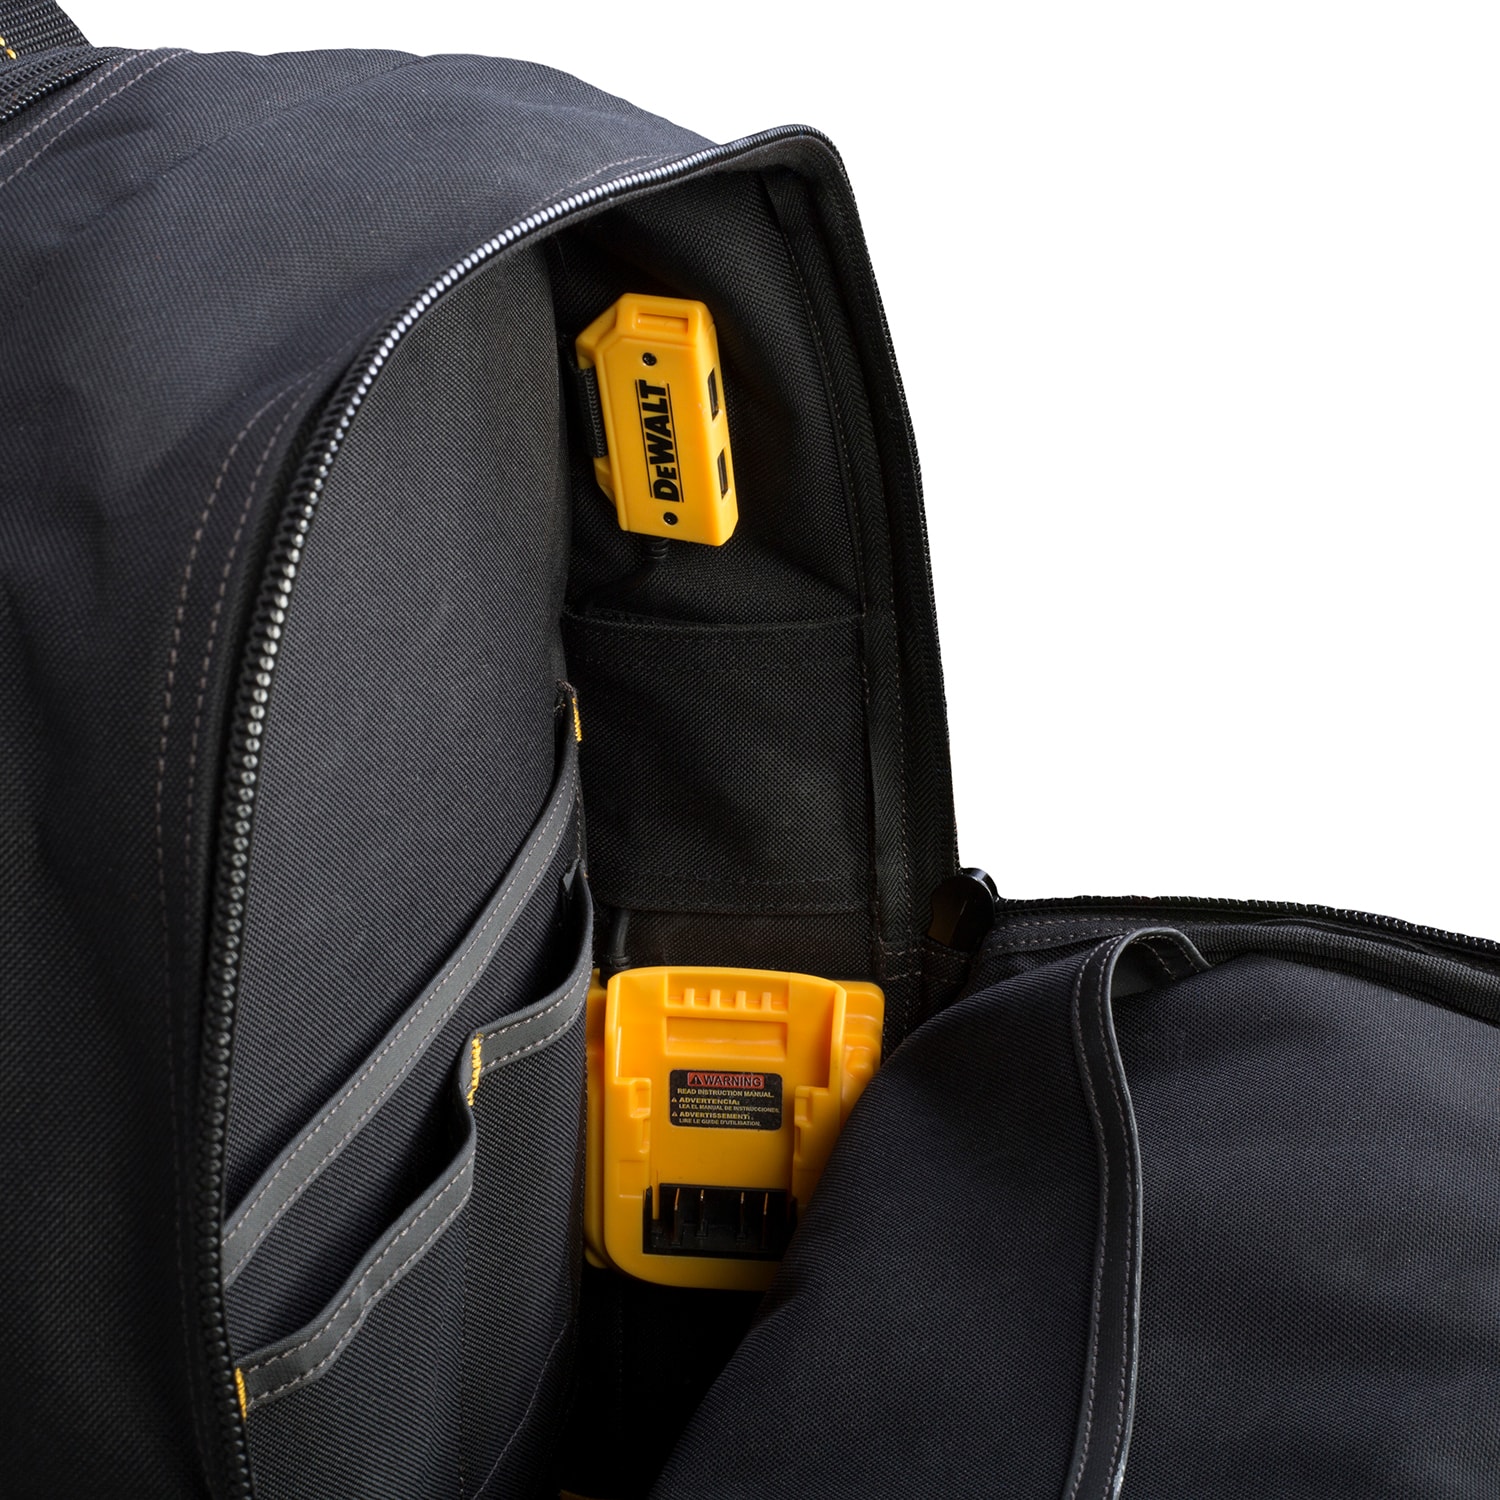 DEWALT Black/Yellow Polyester 6-in Backpack at Lowes.com